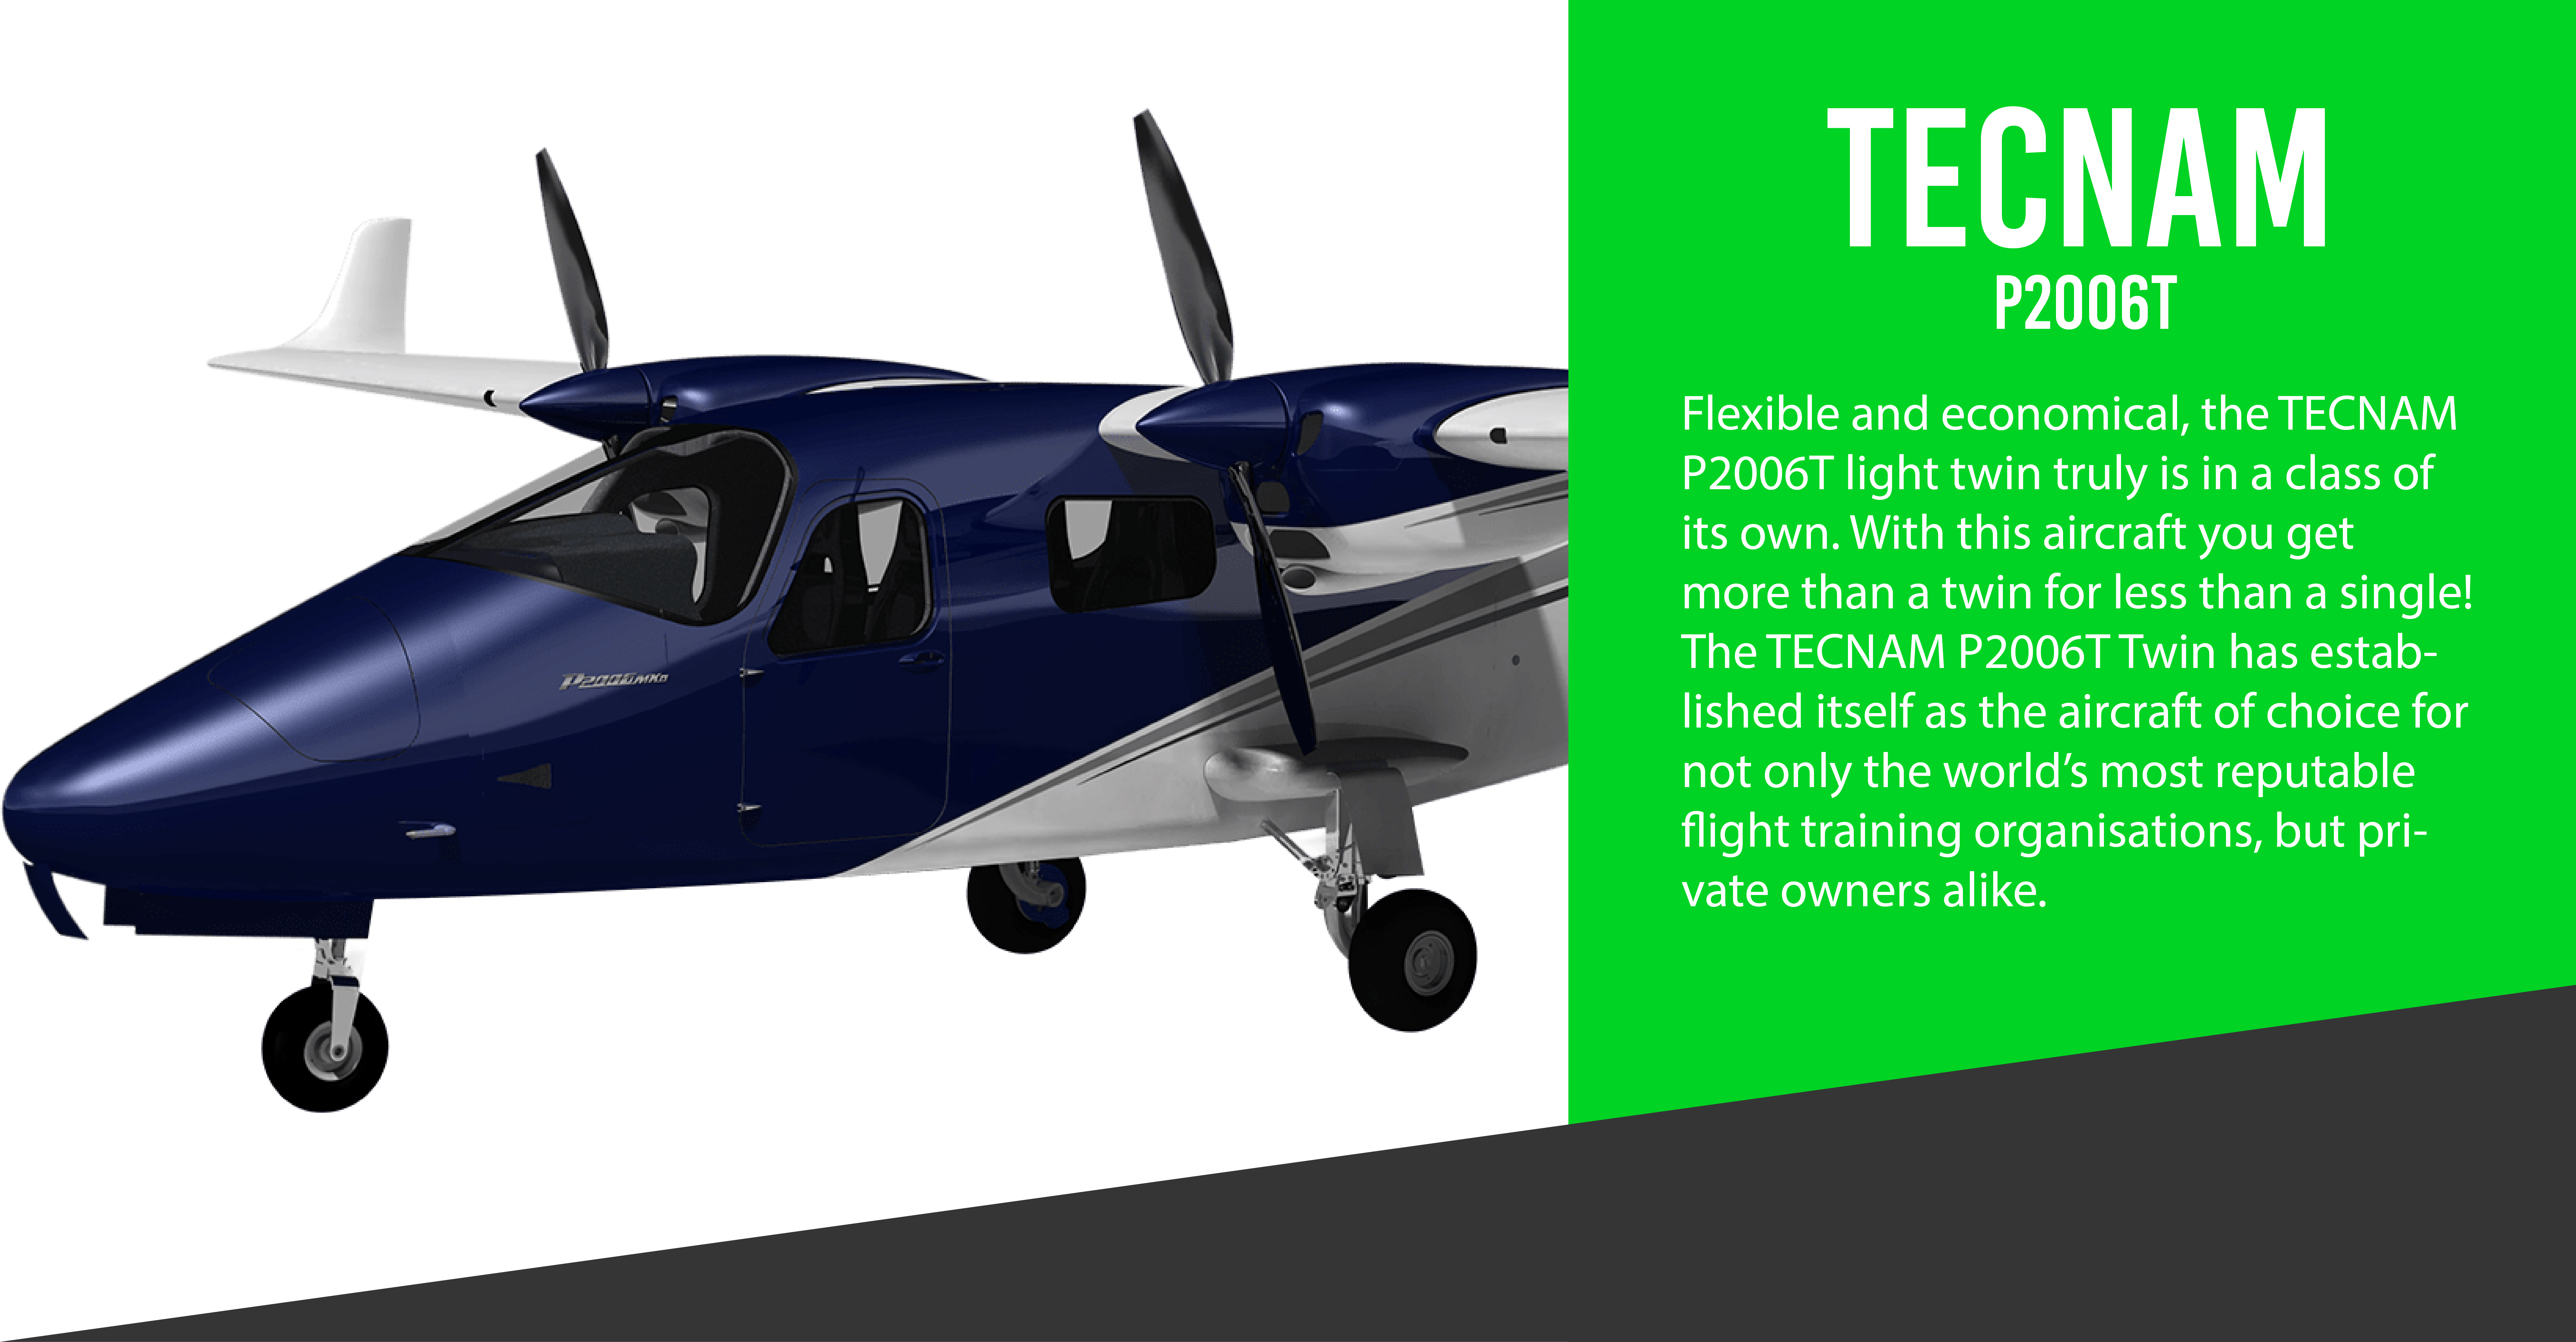 Flexible and economical, the TECNAM P2006T light twin truly is in a class of its own. With this aircraft you get more than a twin for less than a single! The TECNAM P2006T Twin has established itself as the aircraft of choice for not only the world’s most reputable flight training organisations, but private owners alike. It’s a firm favourite with leading General Aviation flight-test journalists who praise its styling, handling and very low operating costs. This aircraft with twin engines, constant-speed propeller and retractable gear offers a